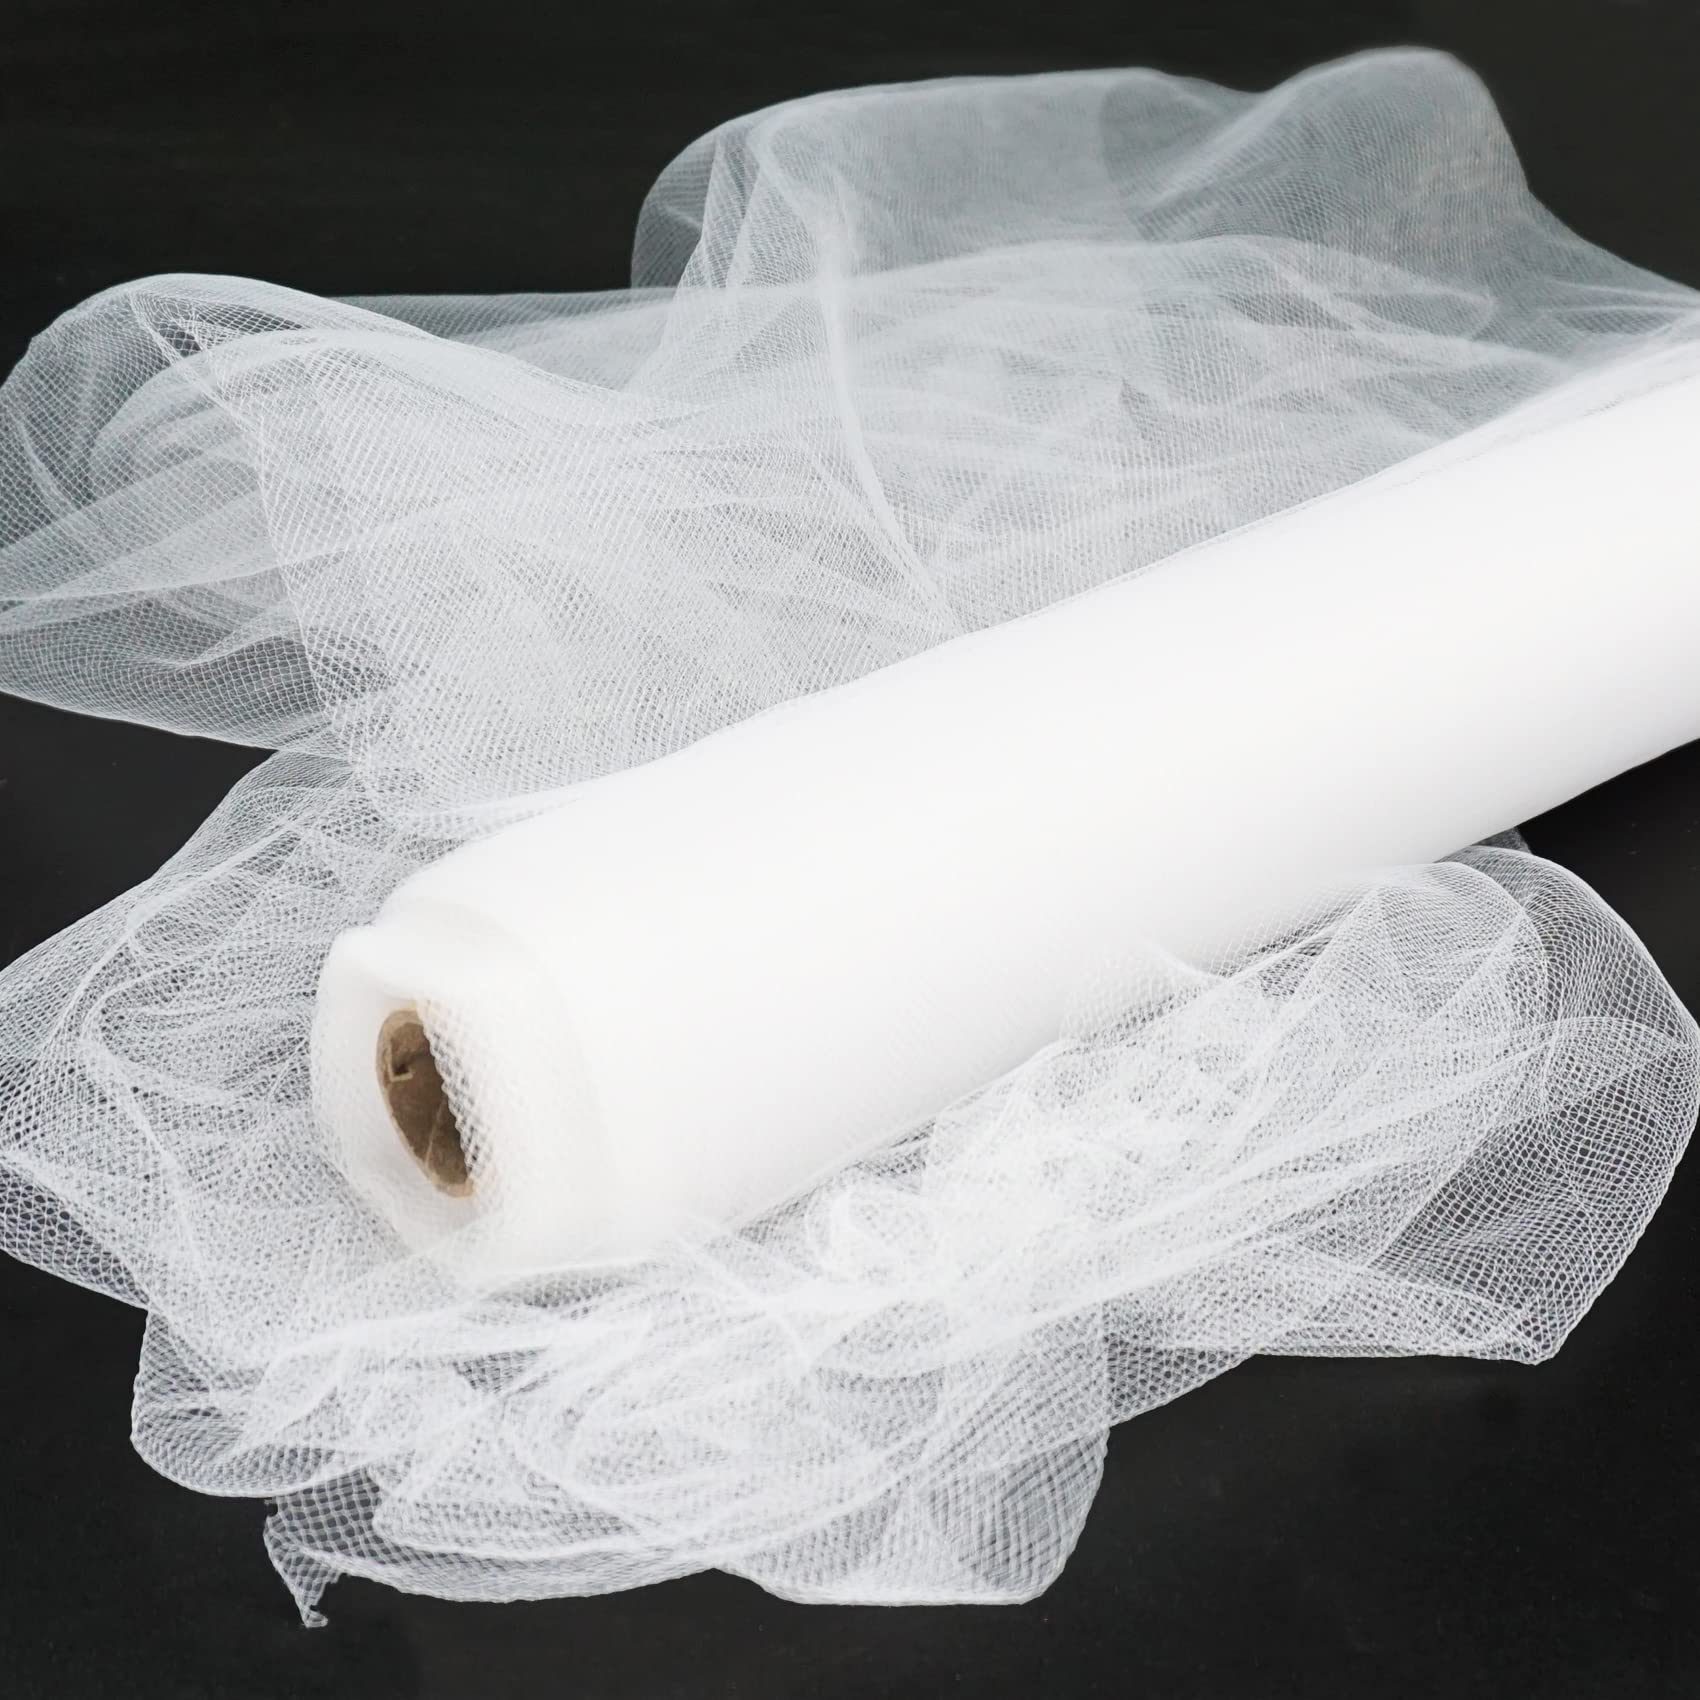 6 Shimmer Tulle Fabric Roll For Crafts, Wedding, Pary Decorations, Gifts -  Off-White 25 Yards